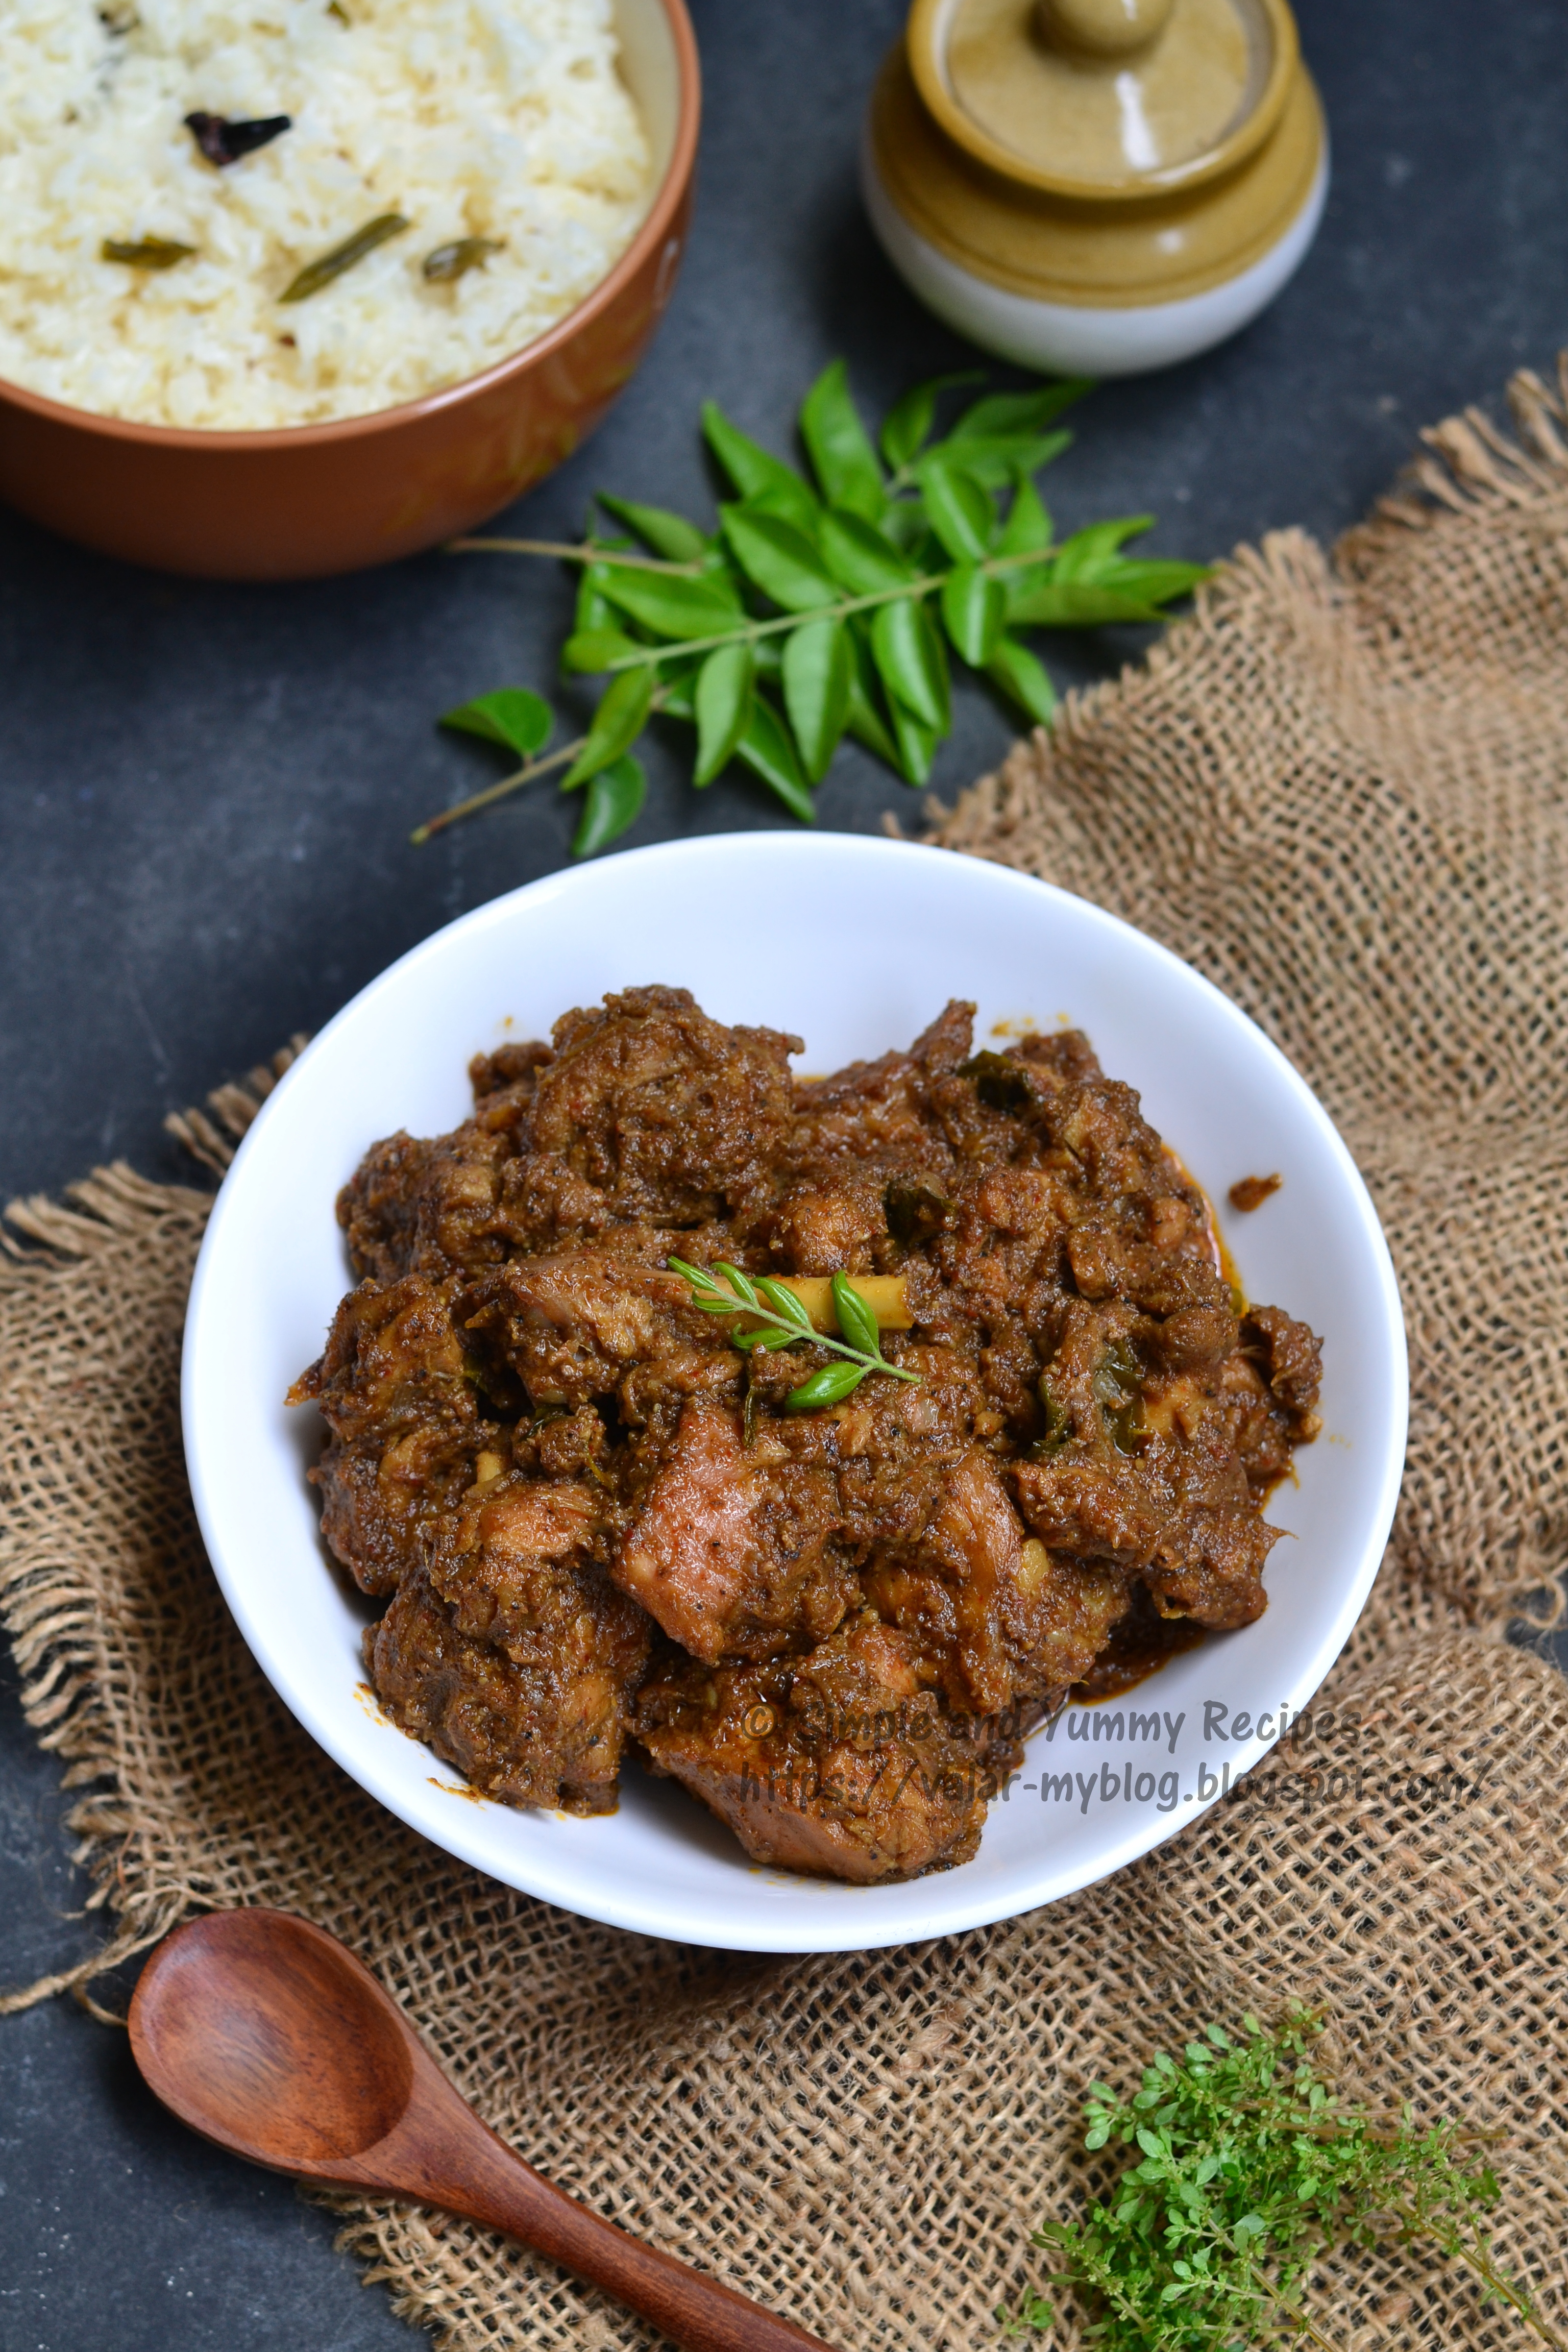 Simple and Yummy Recipes: Spicy South Indian Chicken Curry | Yummy ...